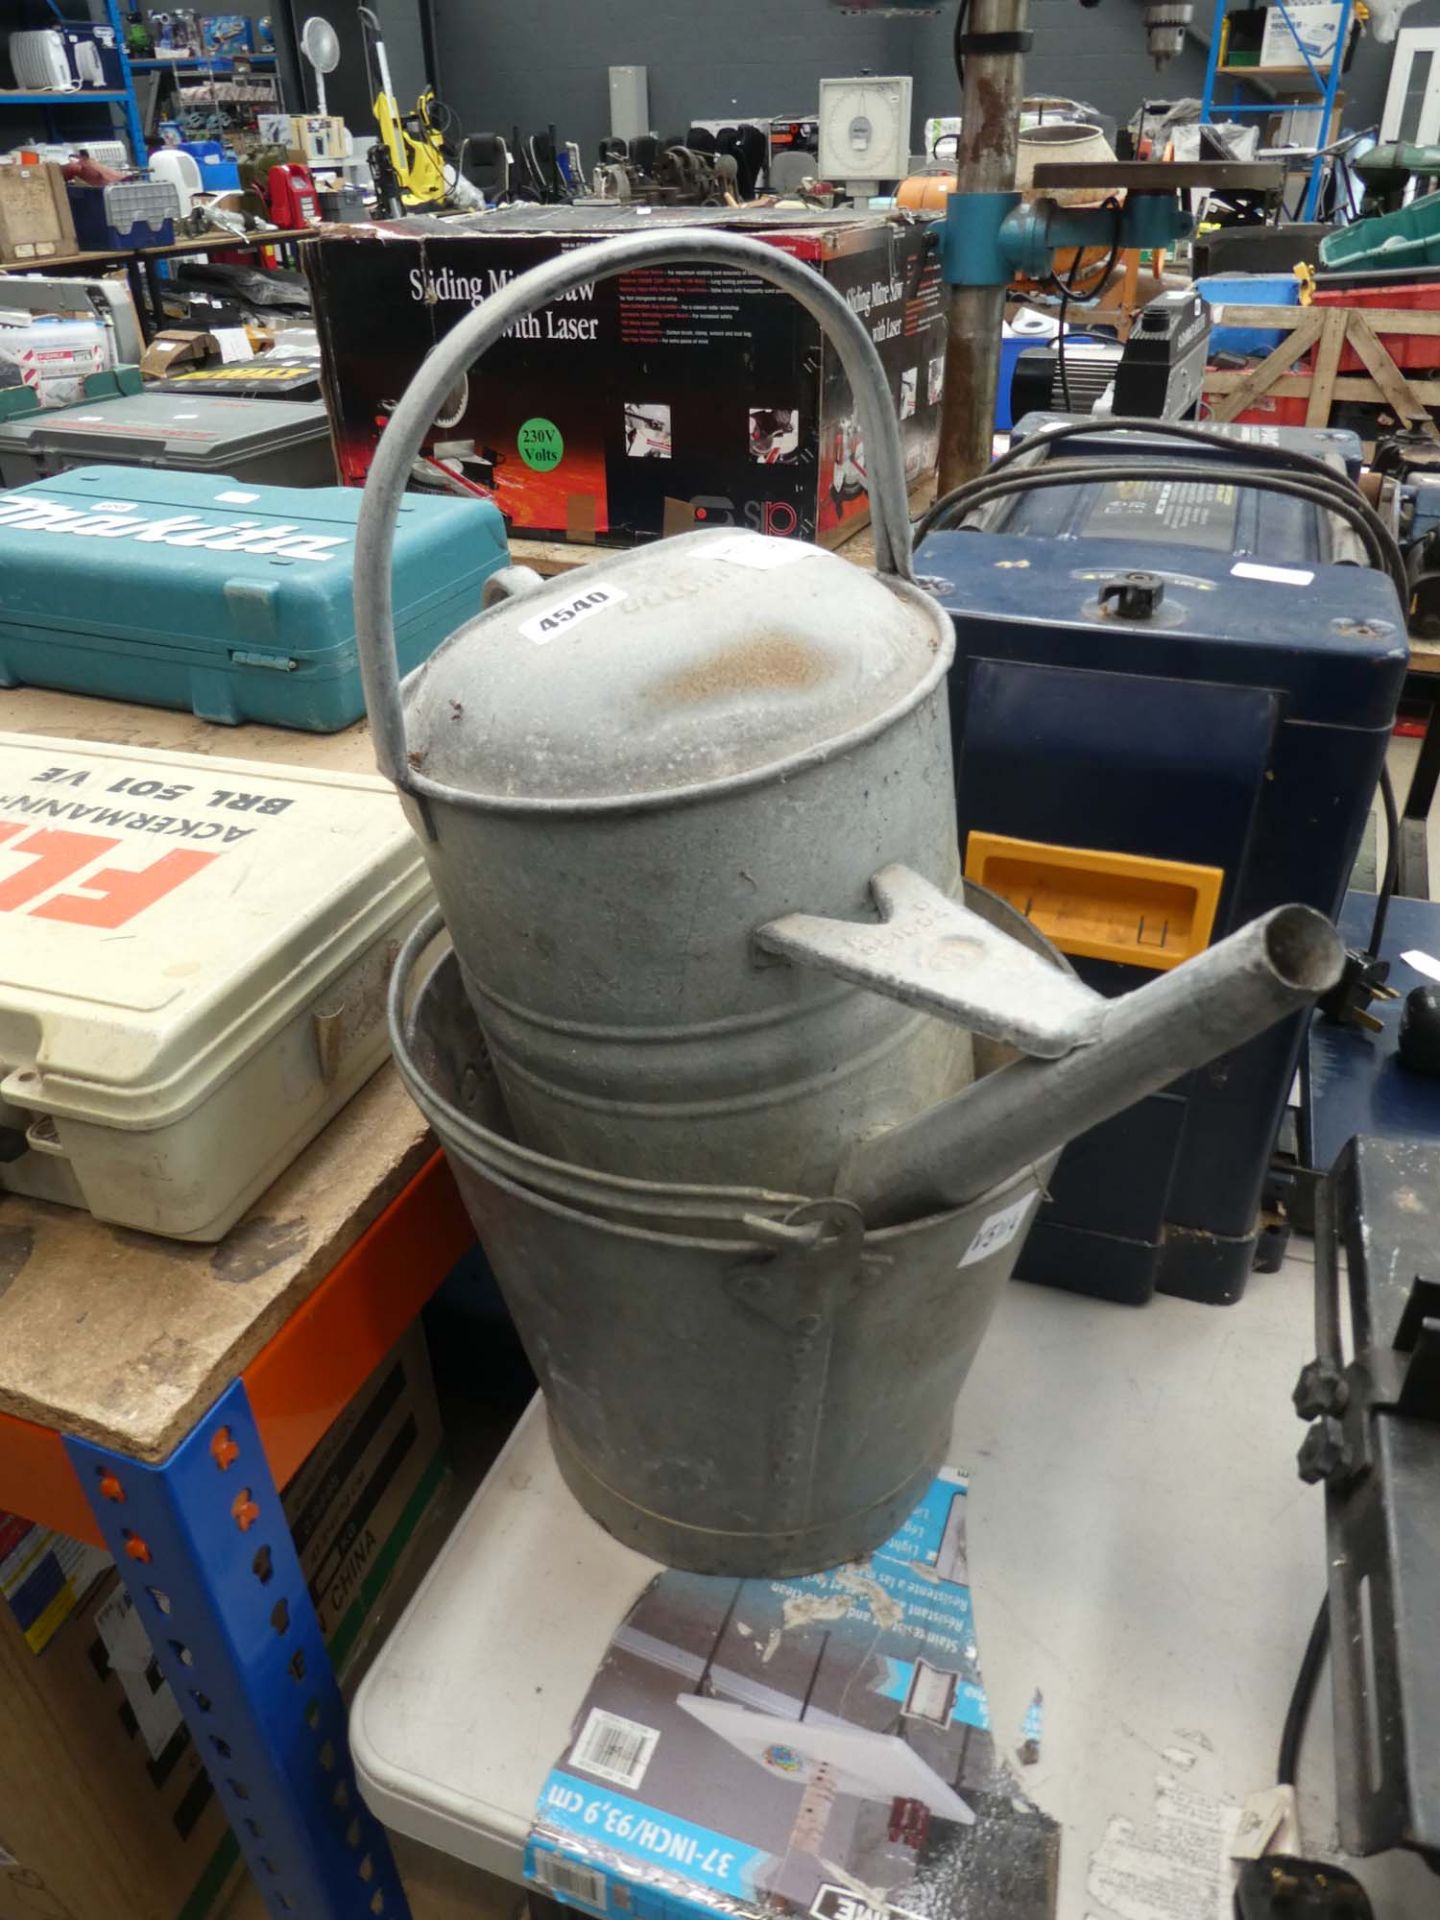 Galvanised bucket and watering can